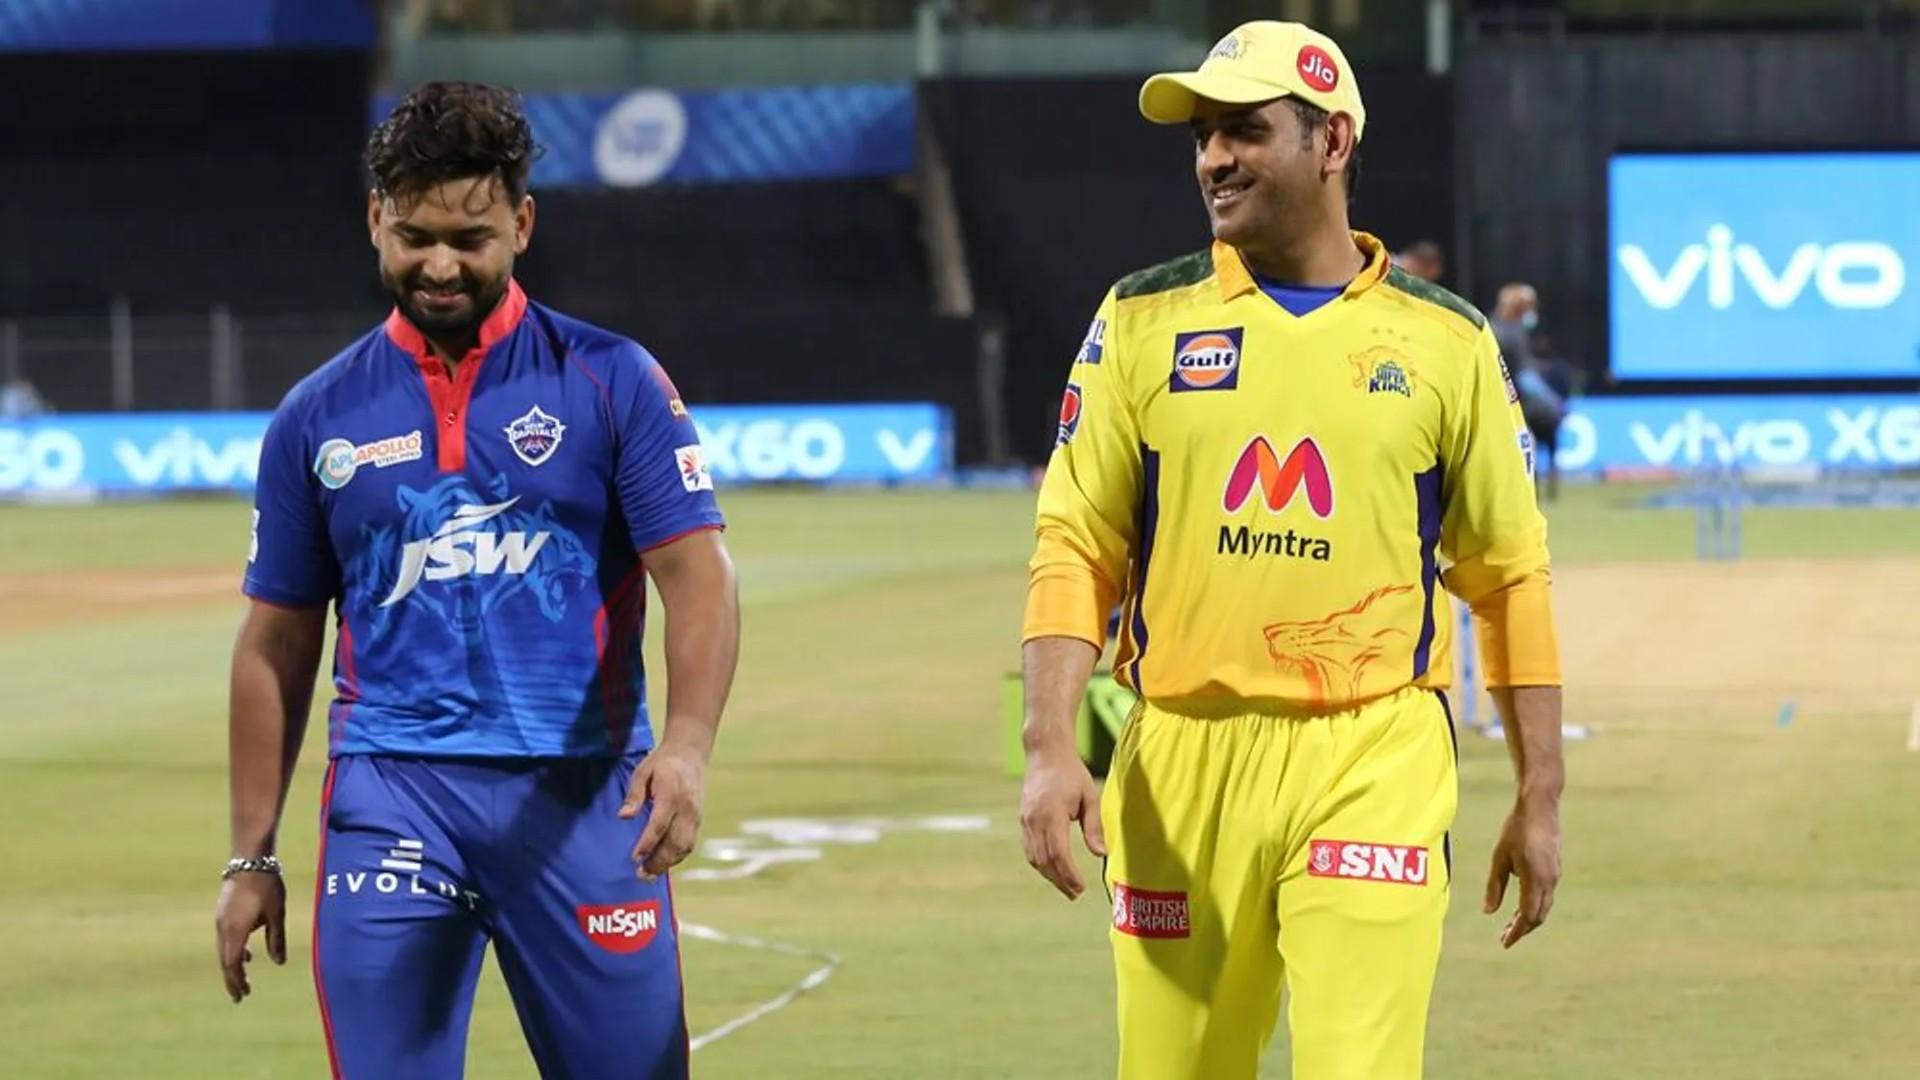 MS Dhoni and Rishabh Pant ahead of the IPL 2021 game between DC and CSK. (Image: IPL/BCCI)